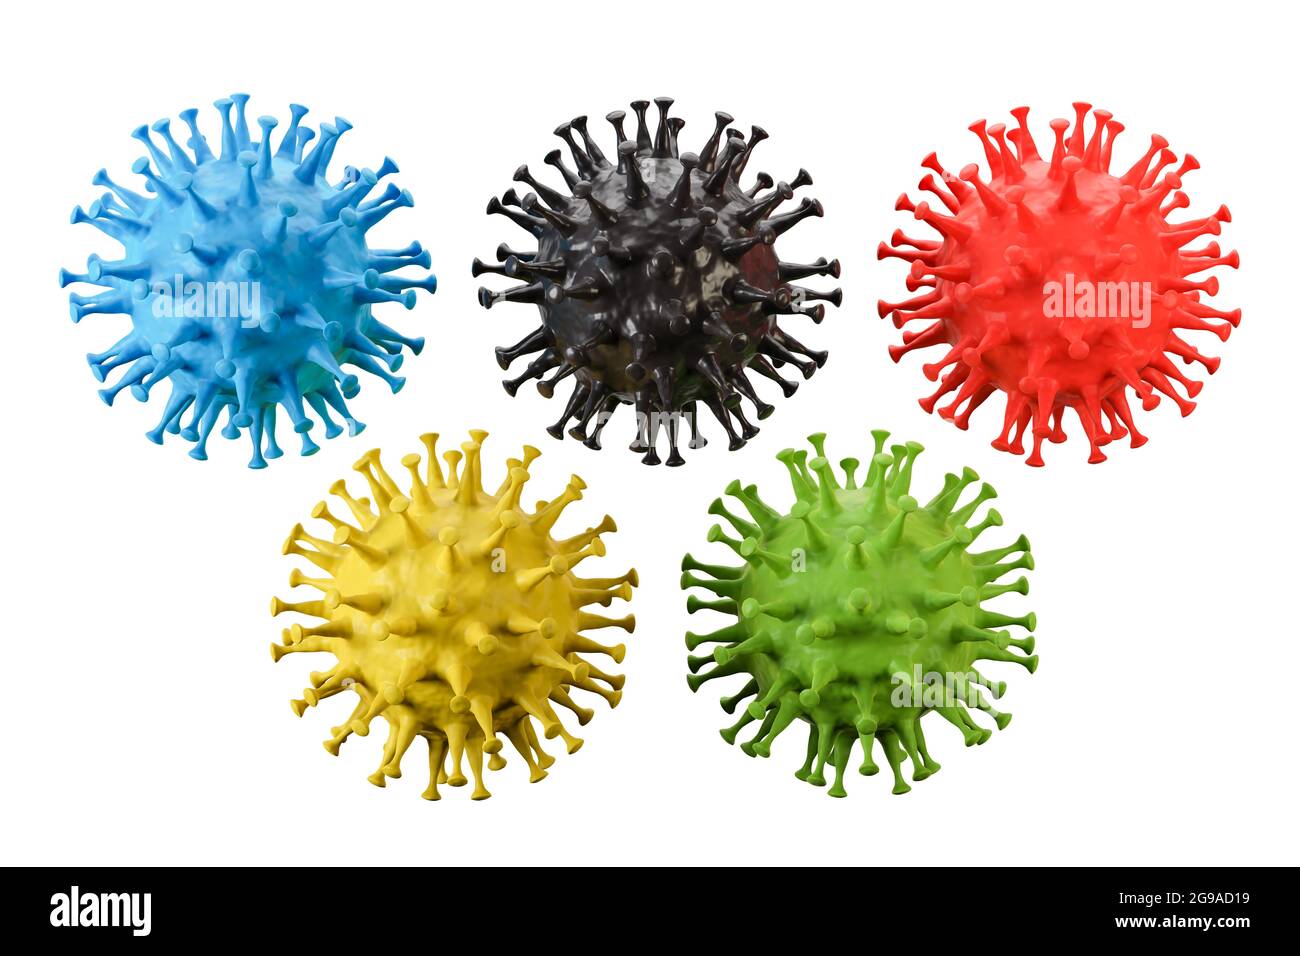 Summer games in times of corona concept - five corona virus models in the colors of the summer games rings isolated on pure white Stock Photo